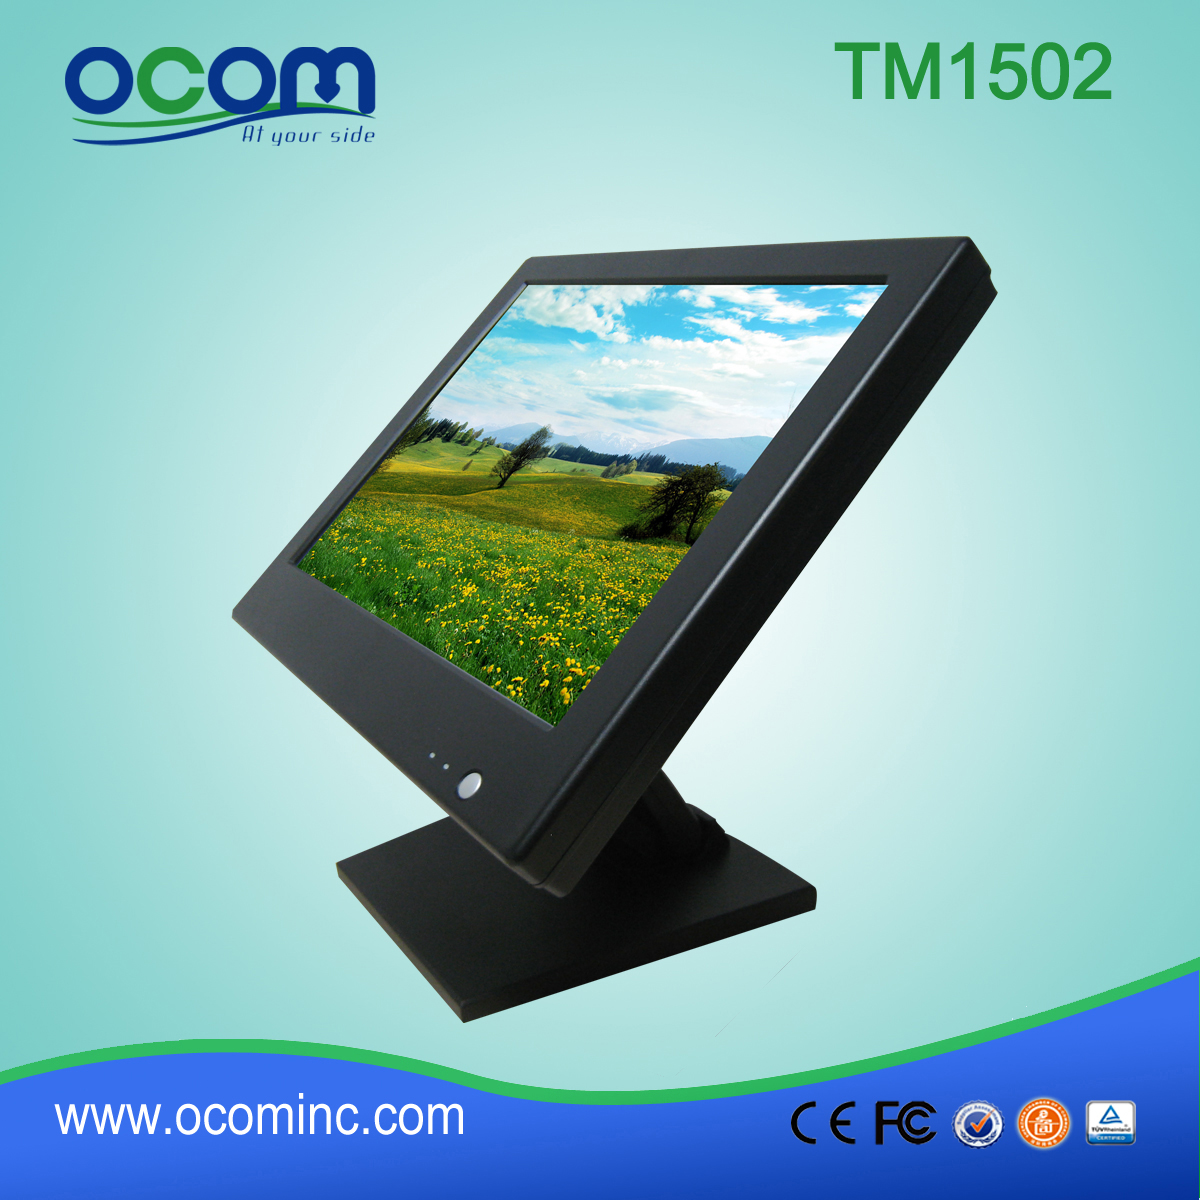 TM1502 Made In China LED Touch Monitor Price